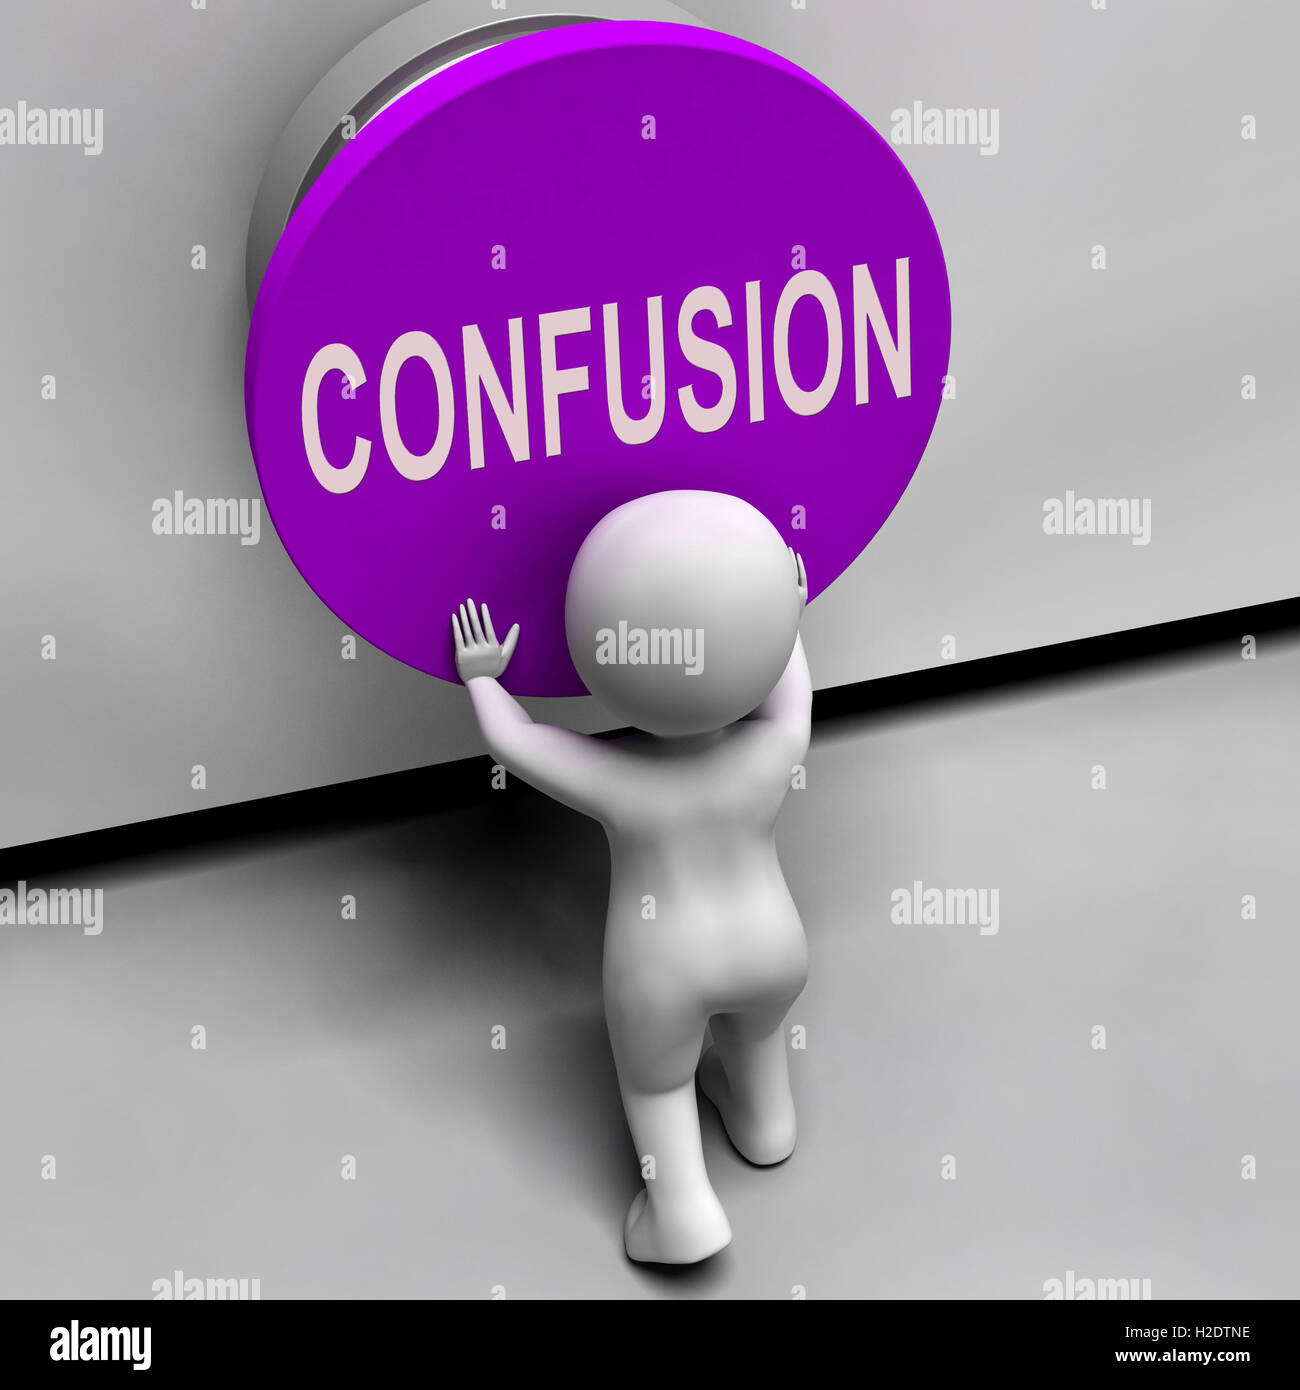 Confusion Button Means Puzzled Bewildered And Perplexed Stock Photo